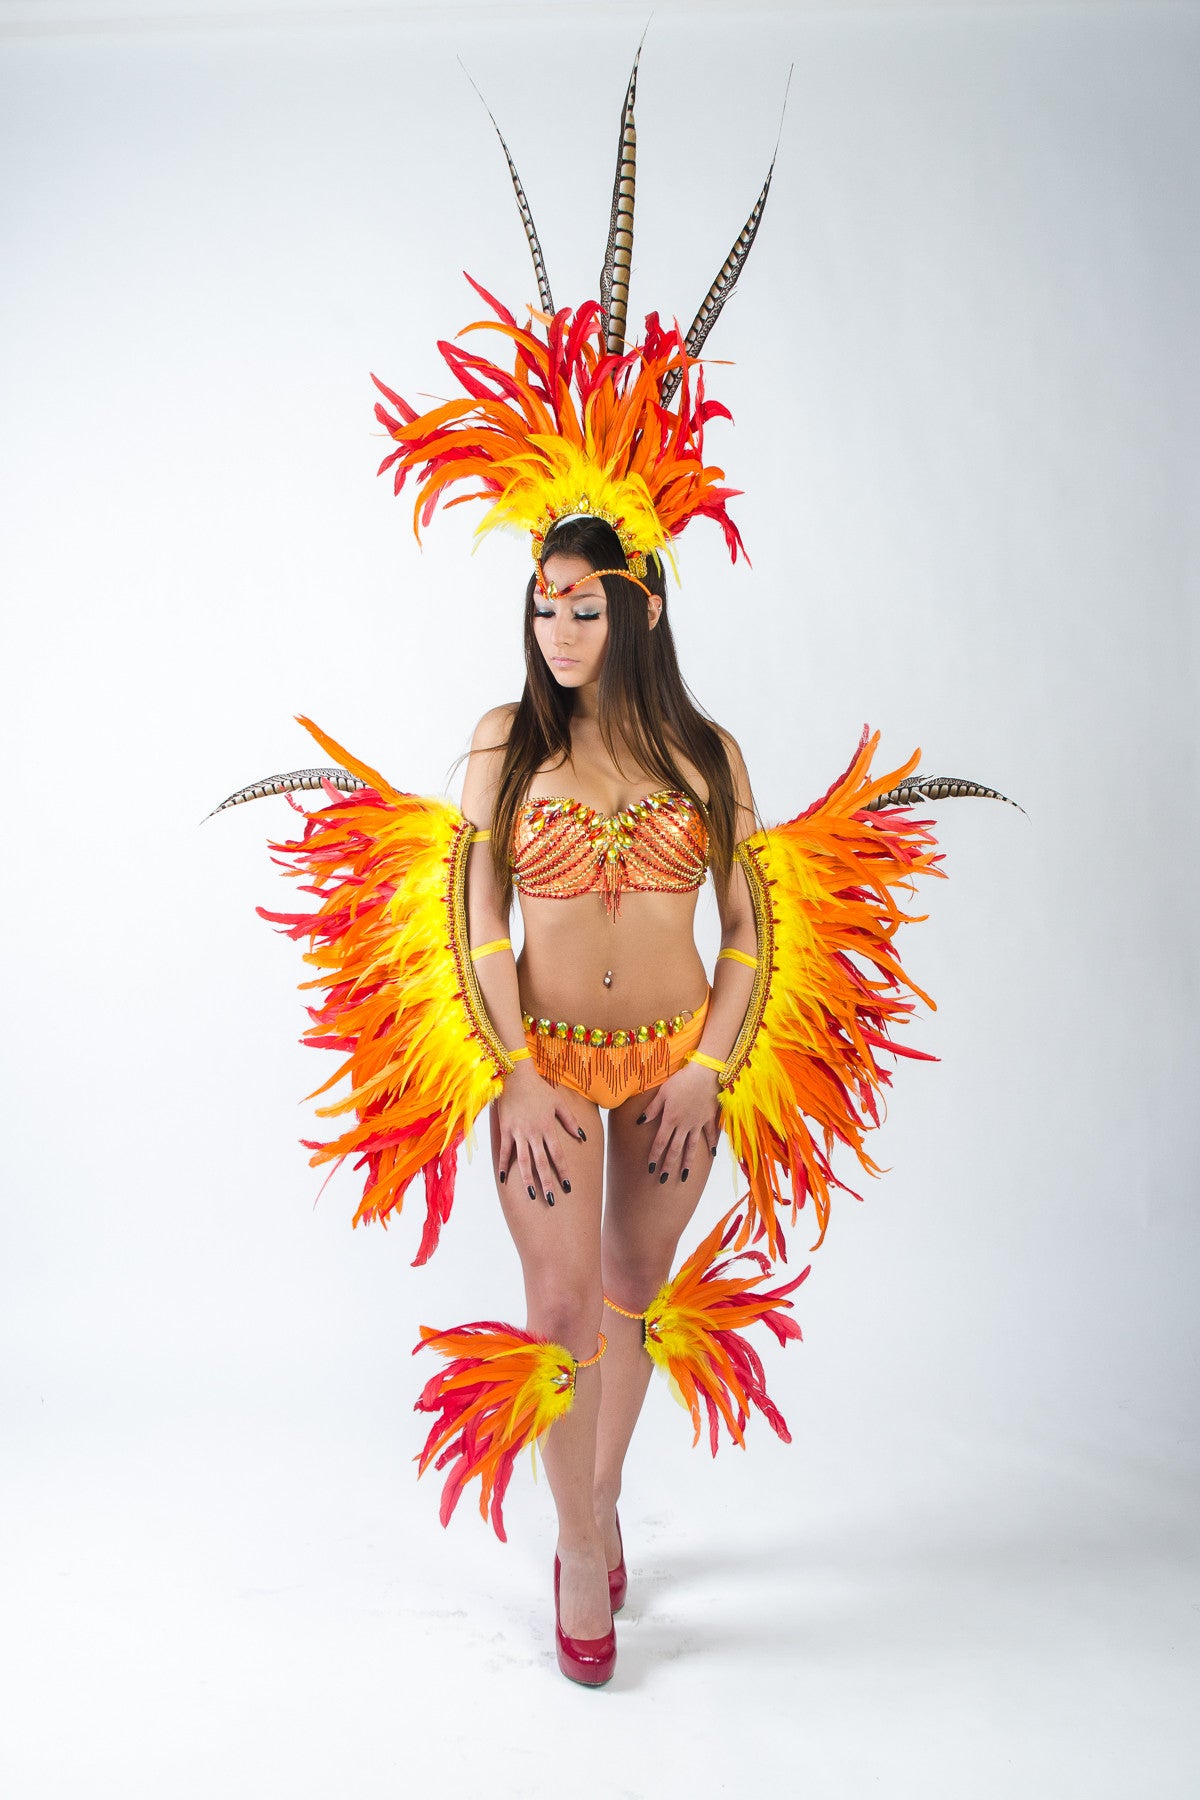 CUSTOM SIZE Phoenix With Peacock Feathers Rave Bra Outfit Edc Cosplay  Costume Samba Carnival Feathered Feathers Fire Girl Flames Adult 